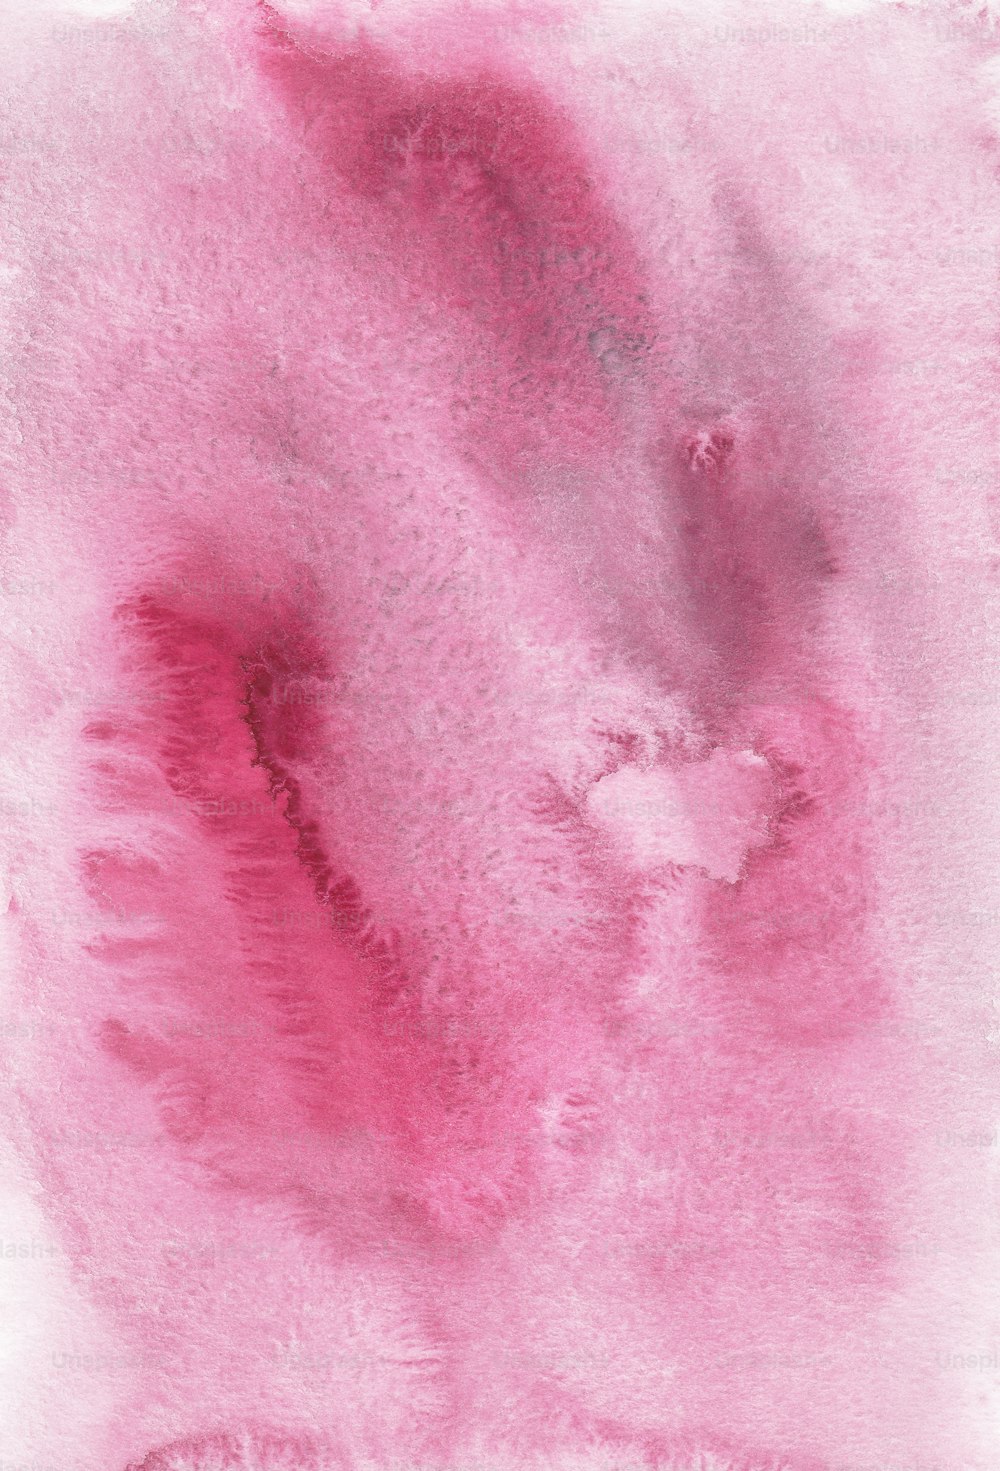 a watercolor painting of a pink substance